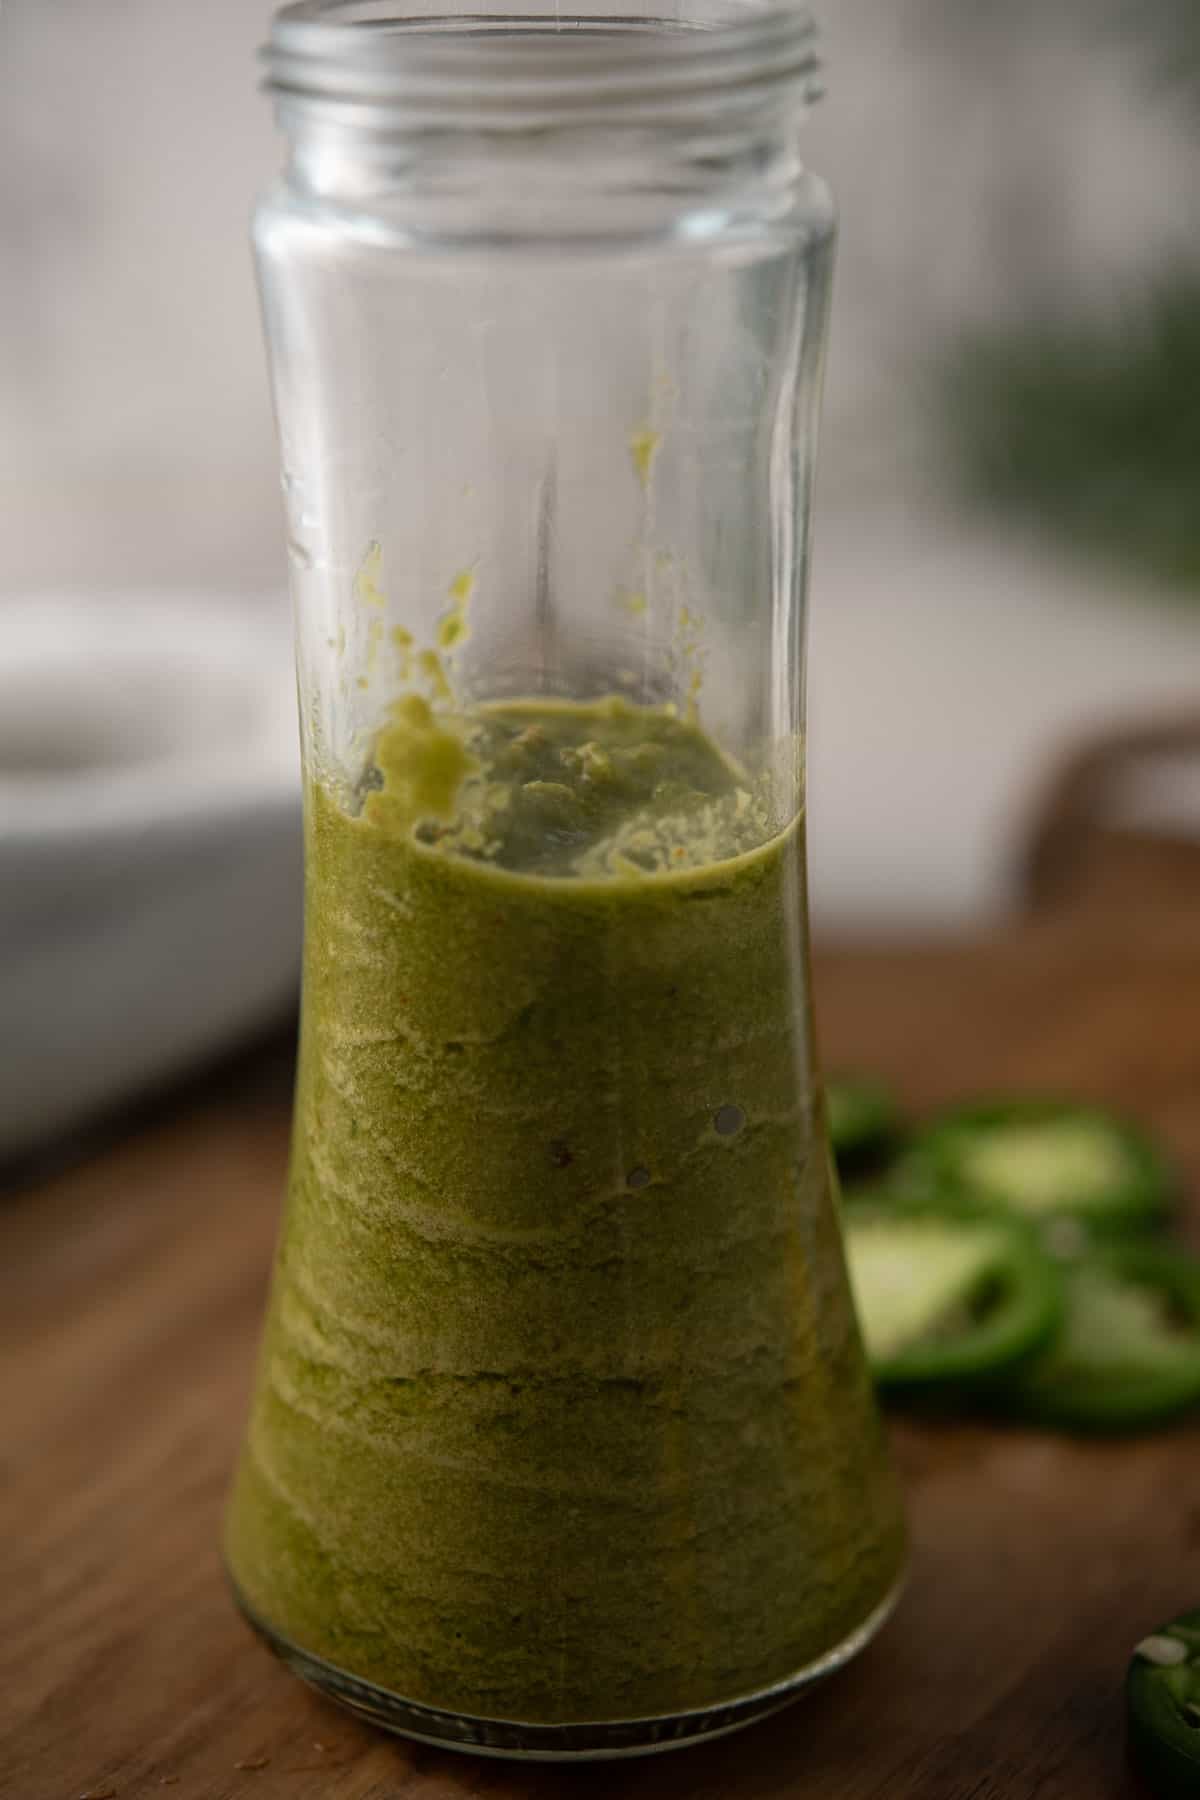 Easy jalapeno marinade in a glass jar